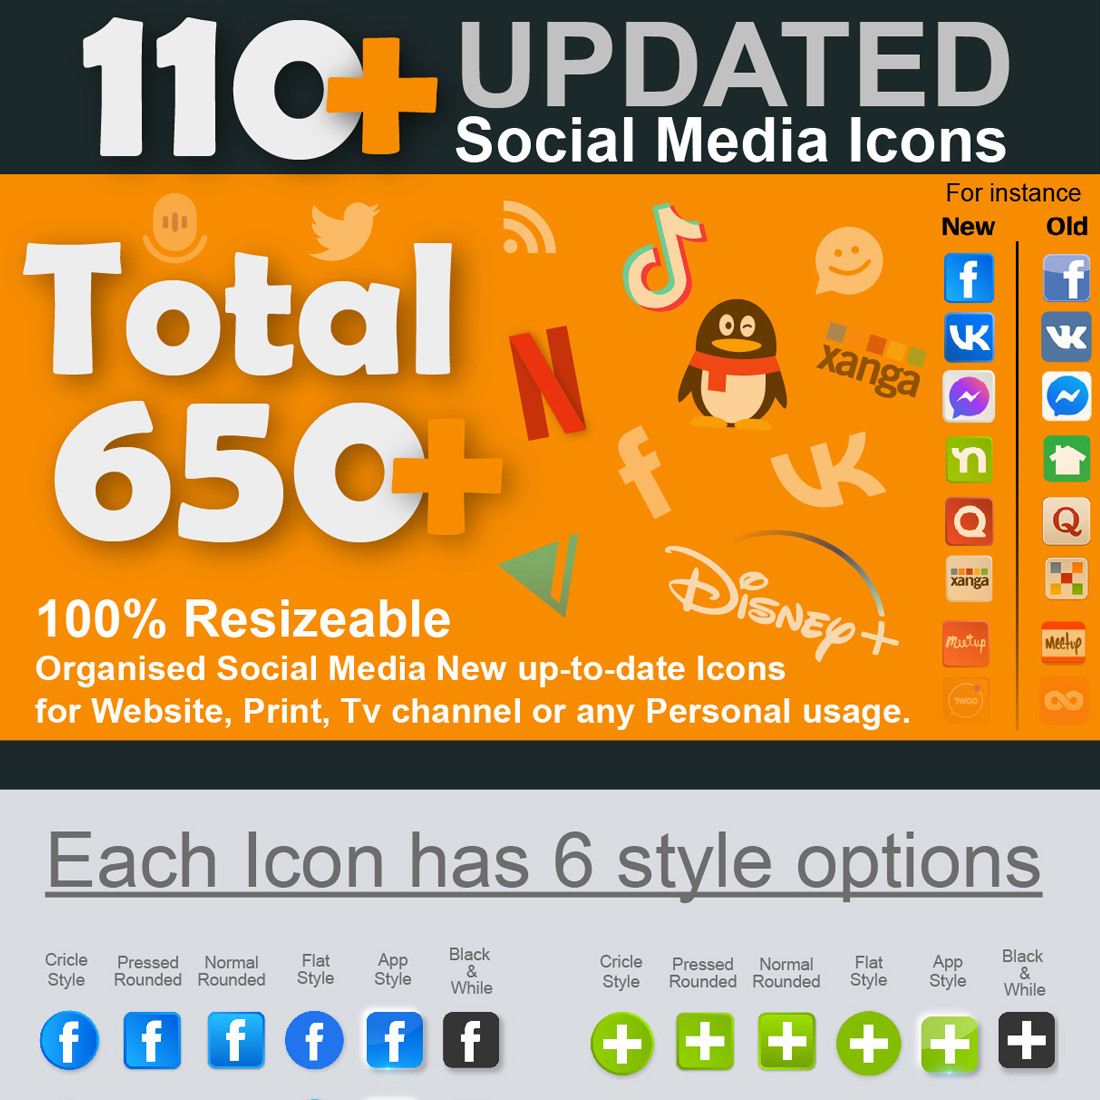 Social Media Updated Icon Set cover image.